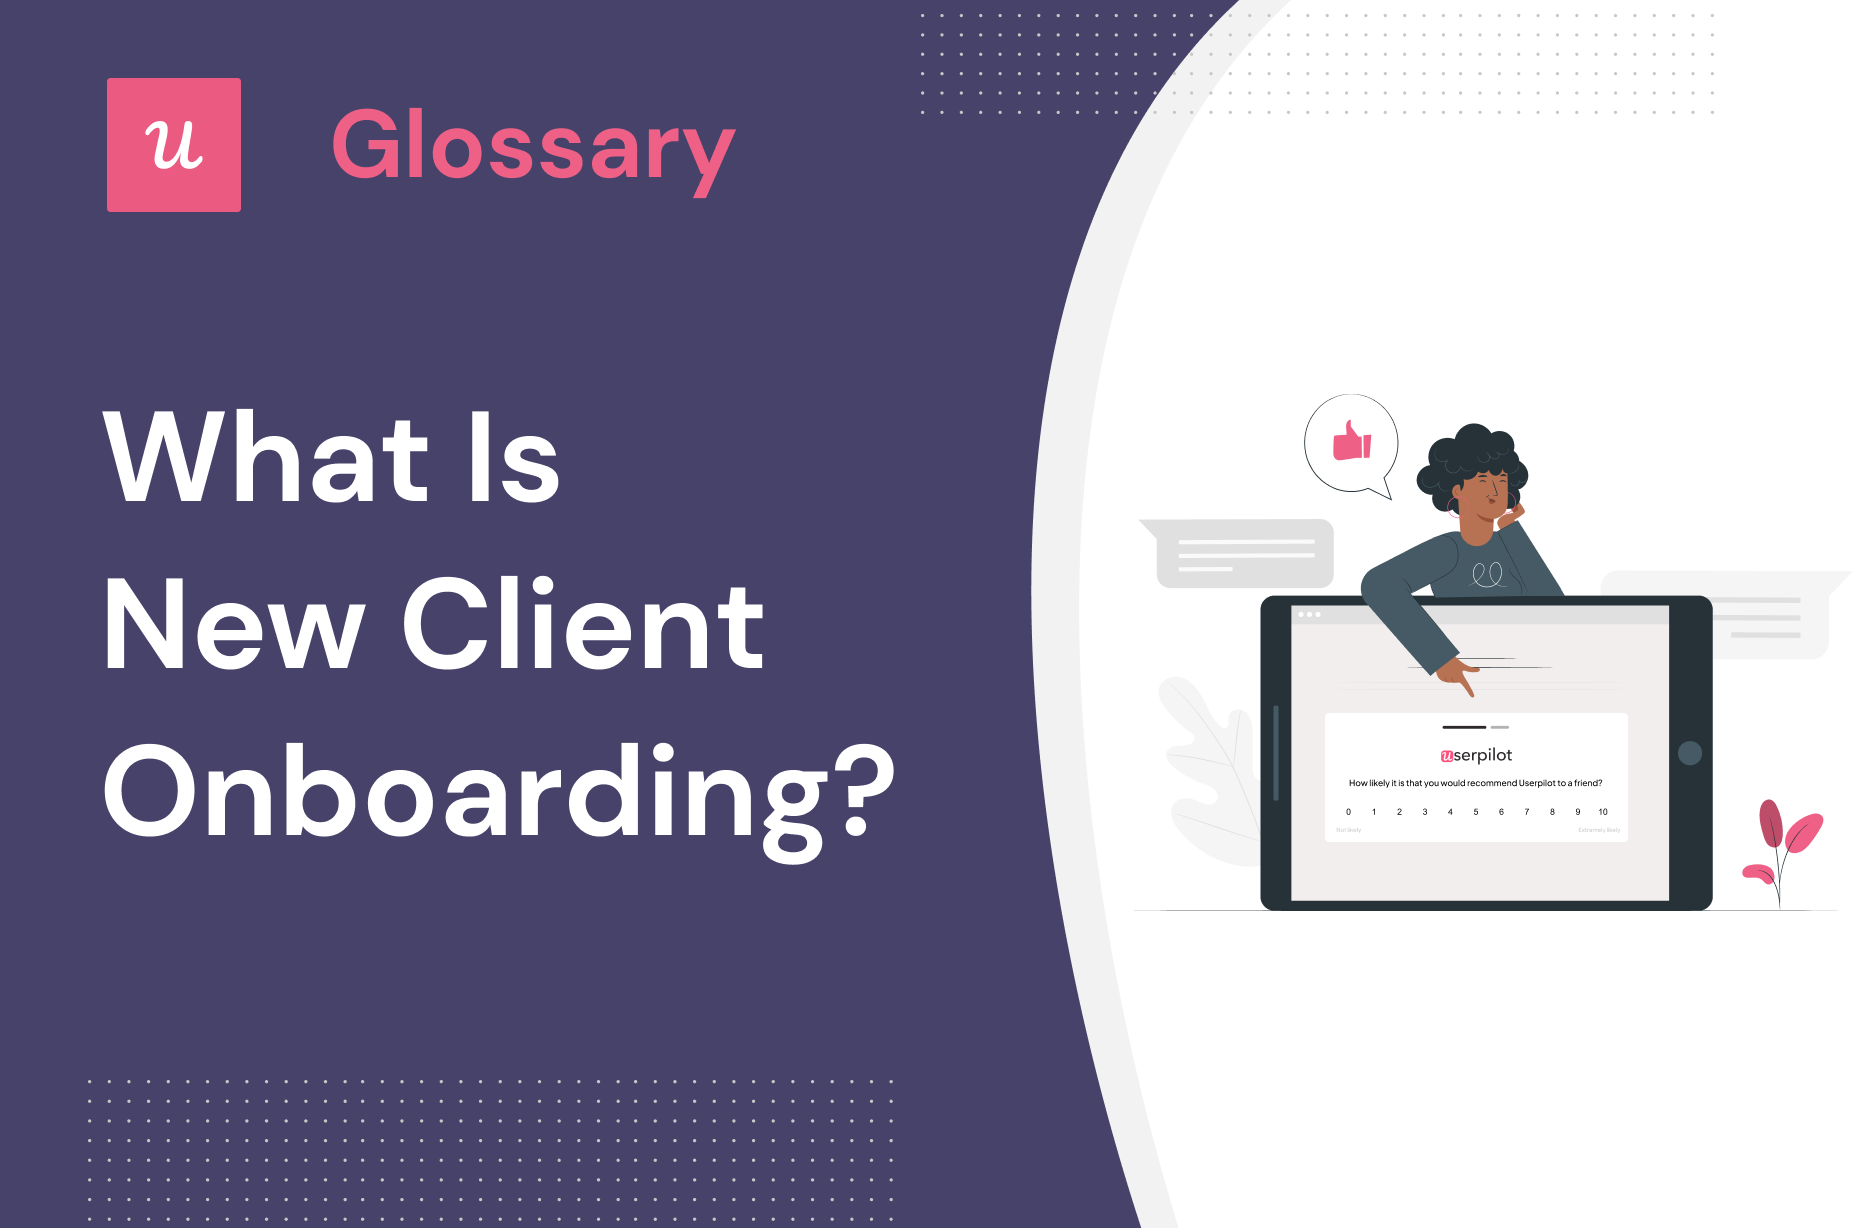 What is New Client Onboarding?